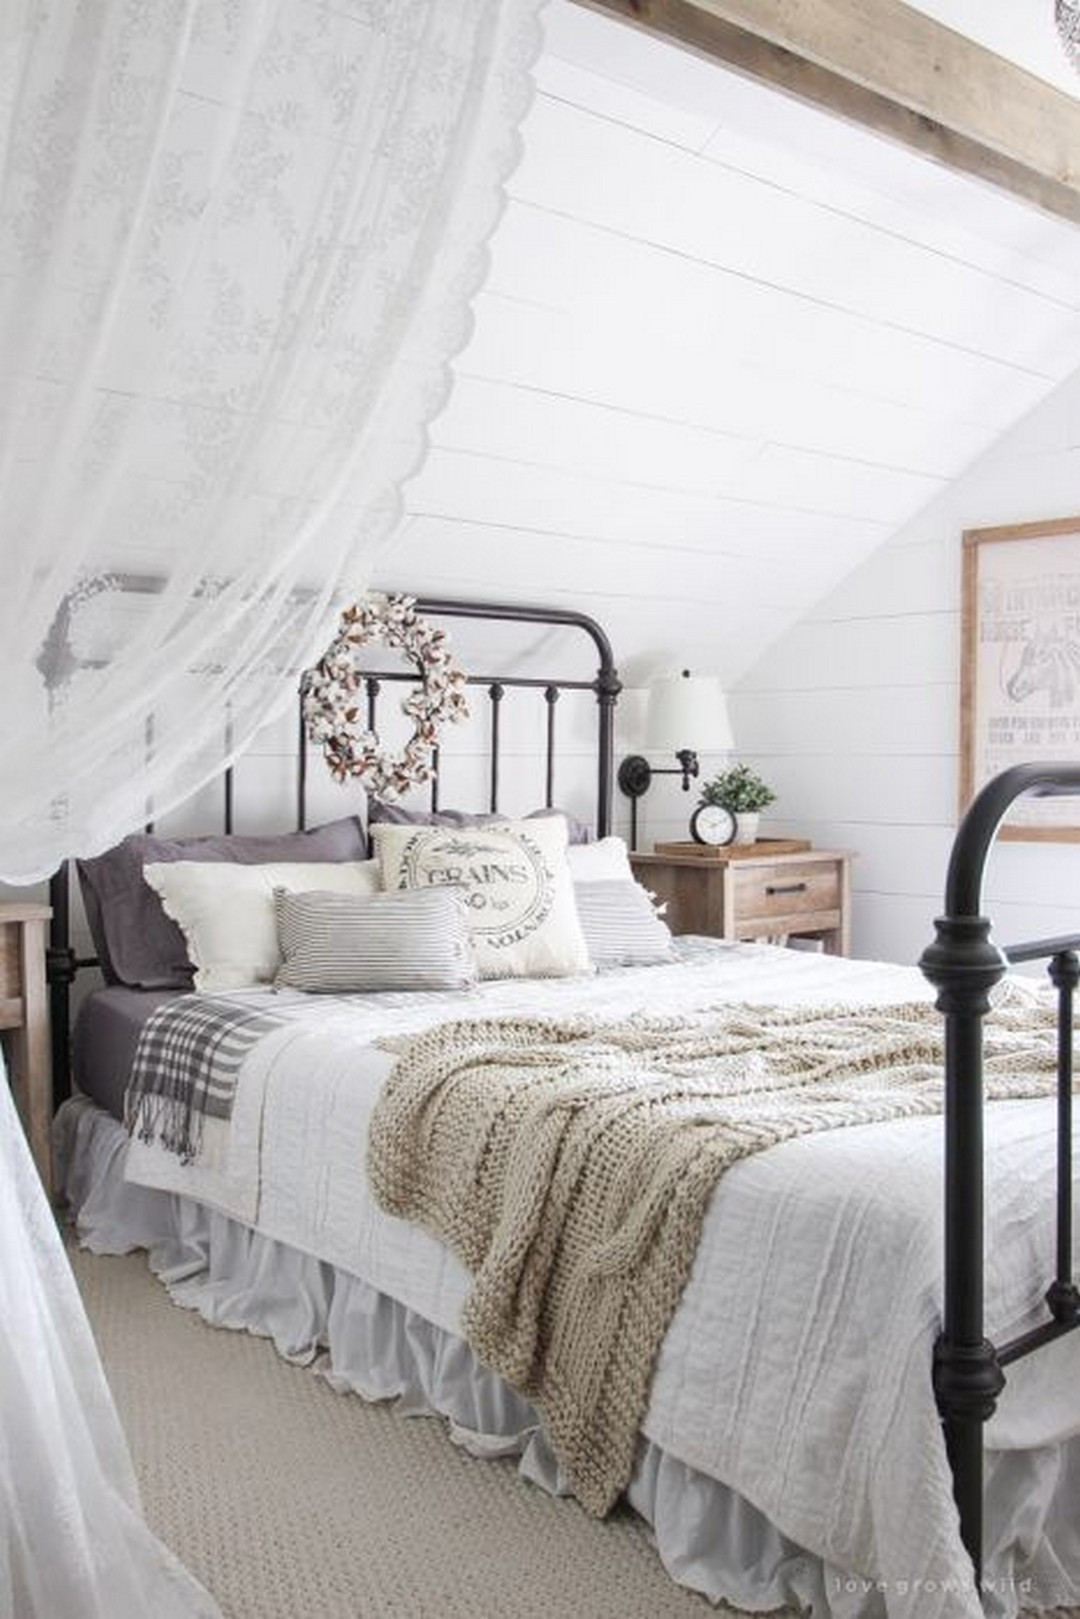 Rustic Farmhouse Bedroom
 Beautiful Farmhouse Bedrooms that are Appropriate in Any